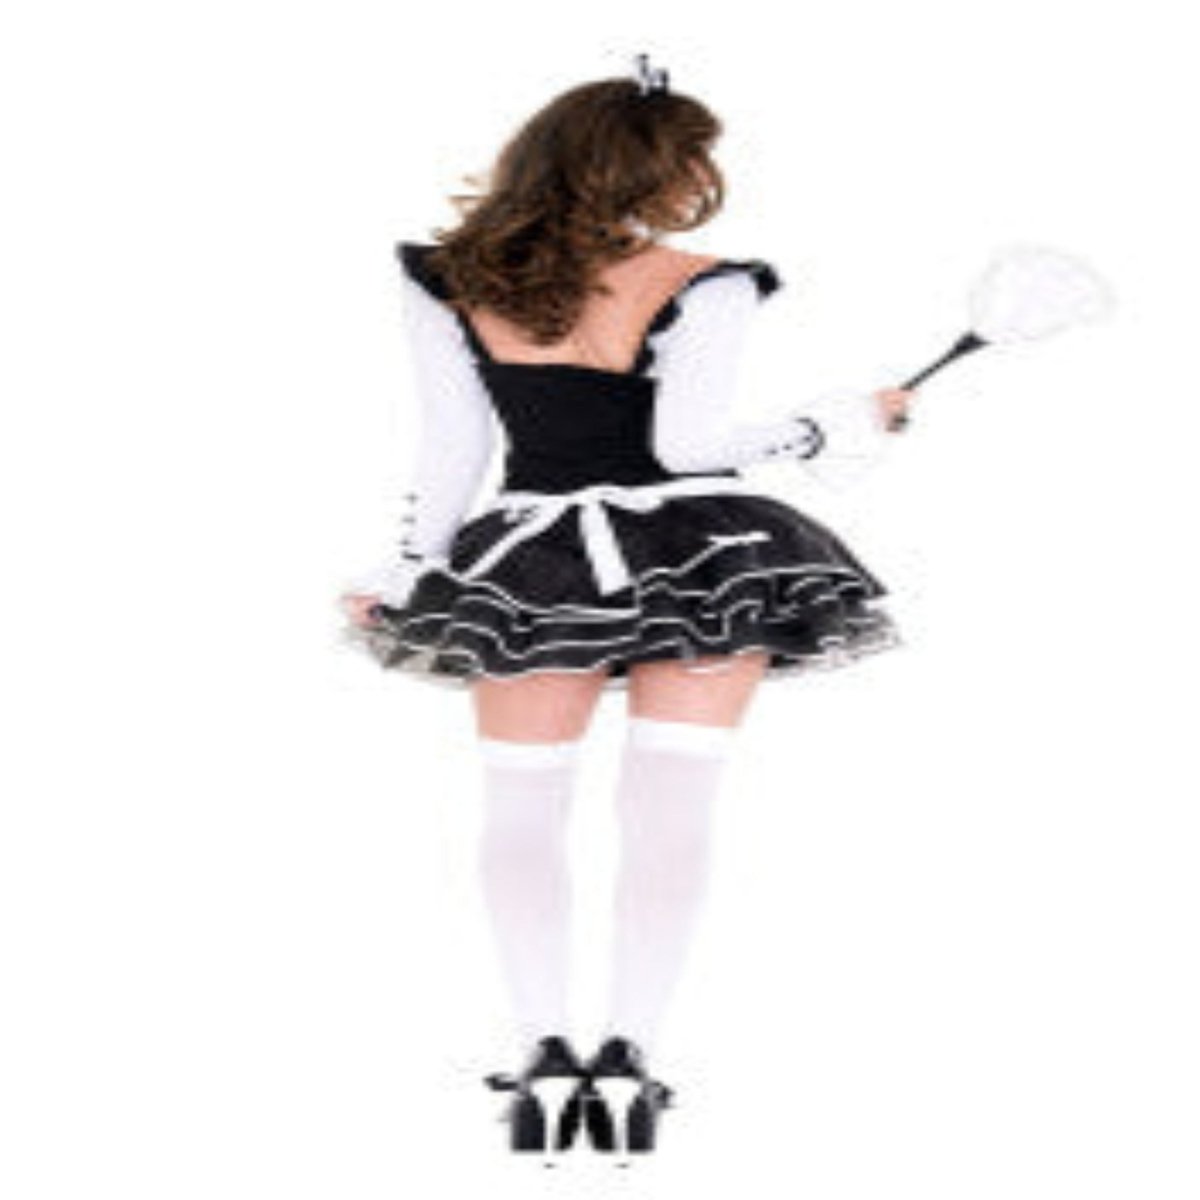 Pretty And Proper French Maid - worldclasscostumes